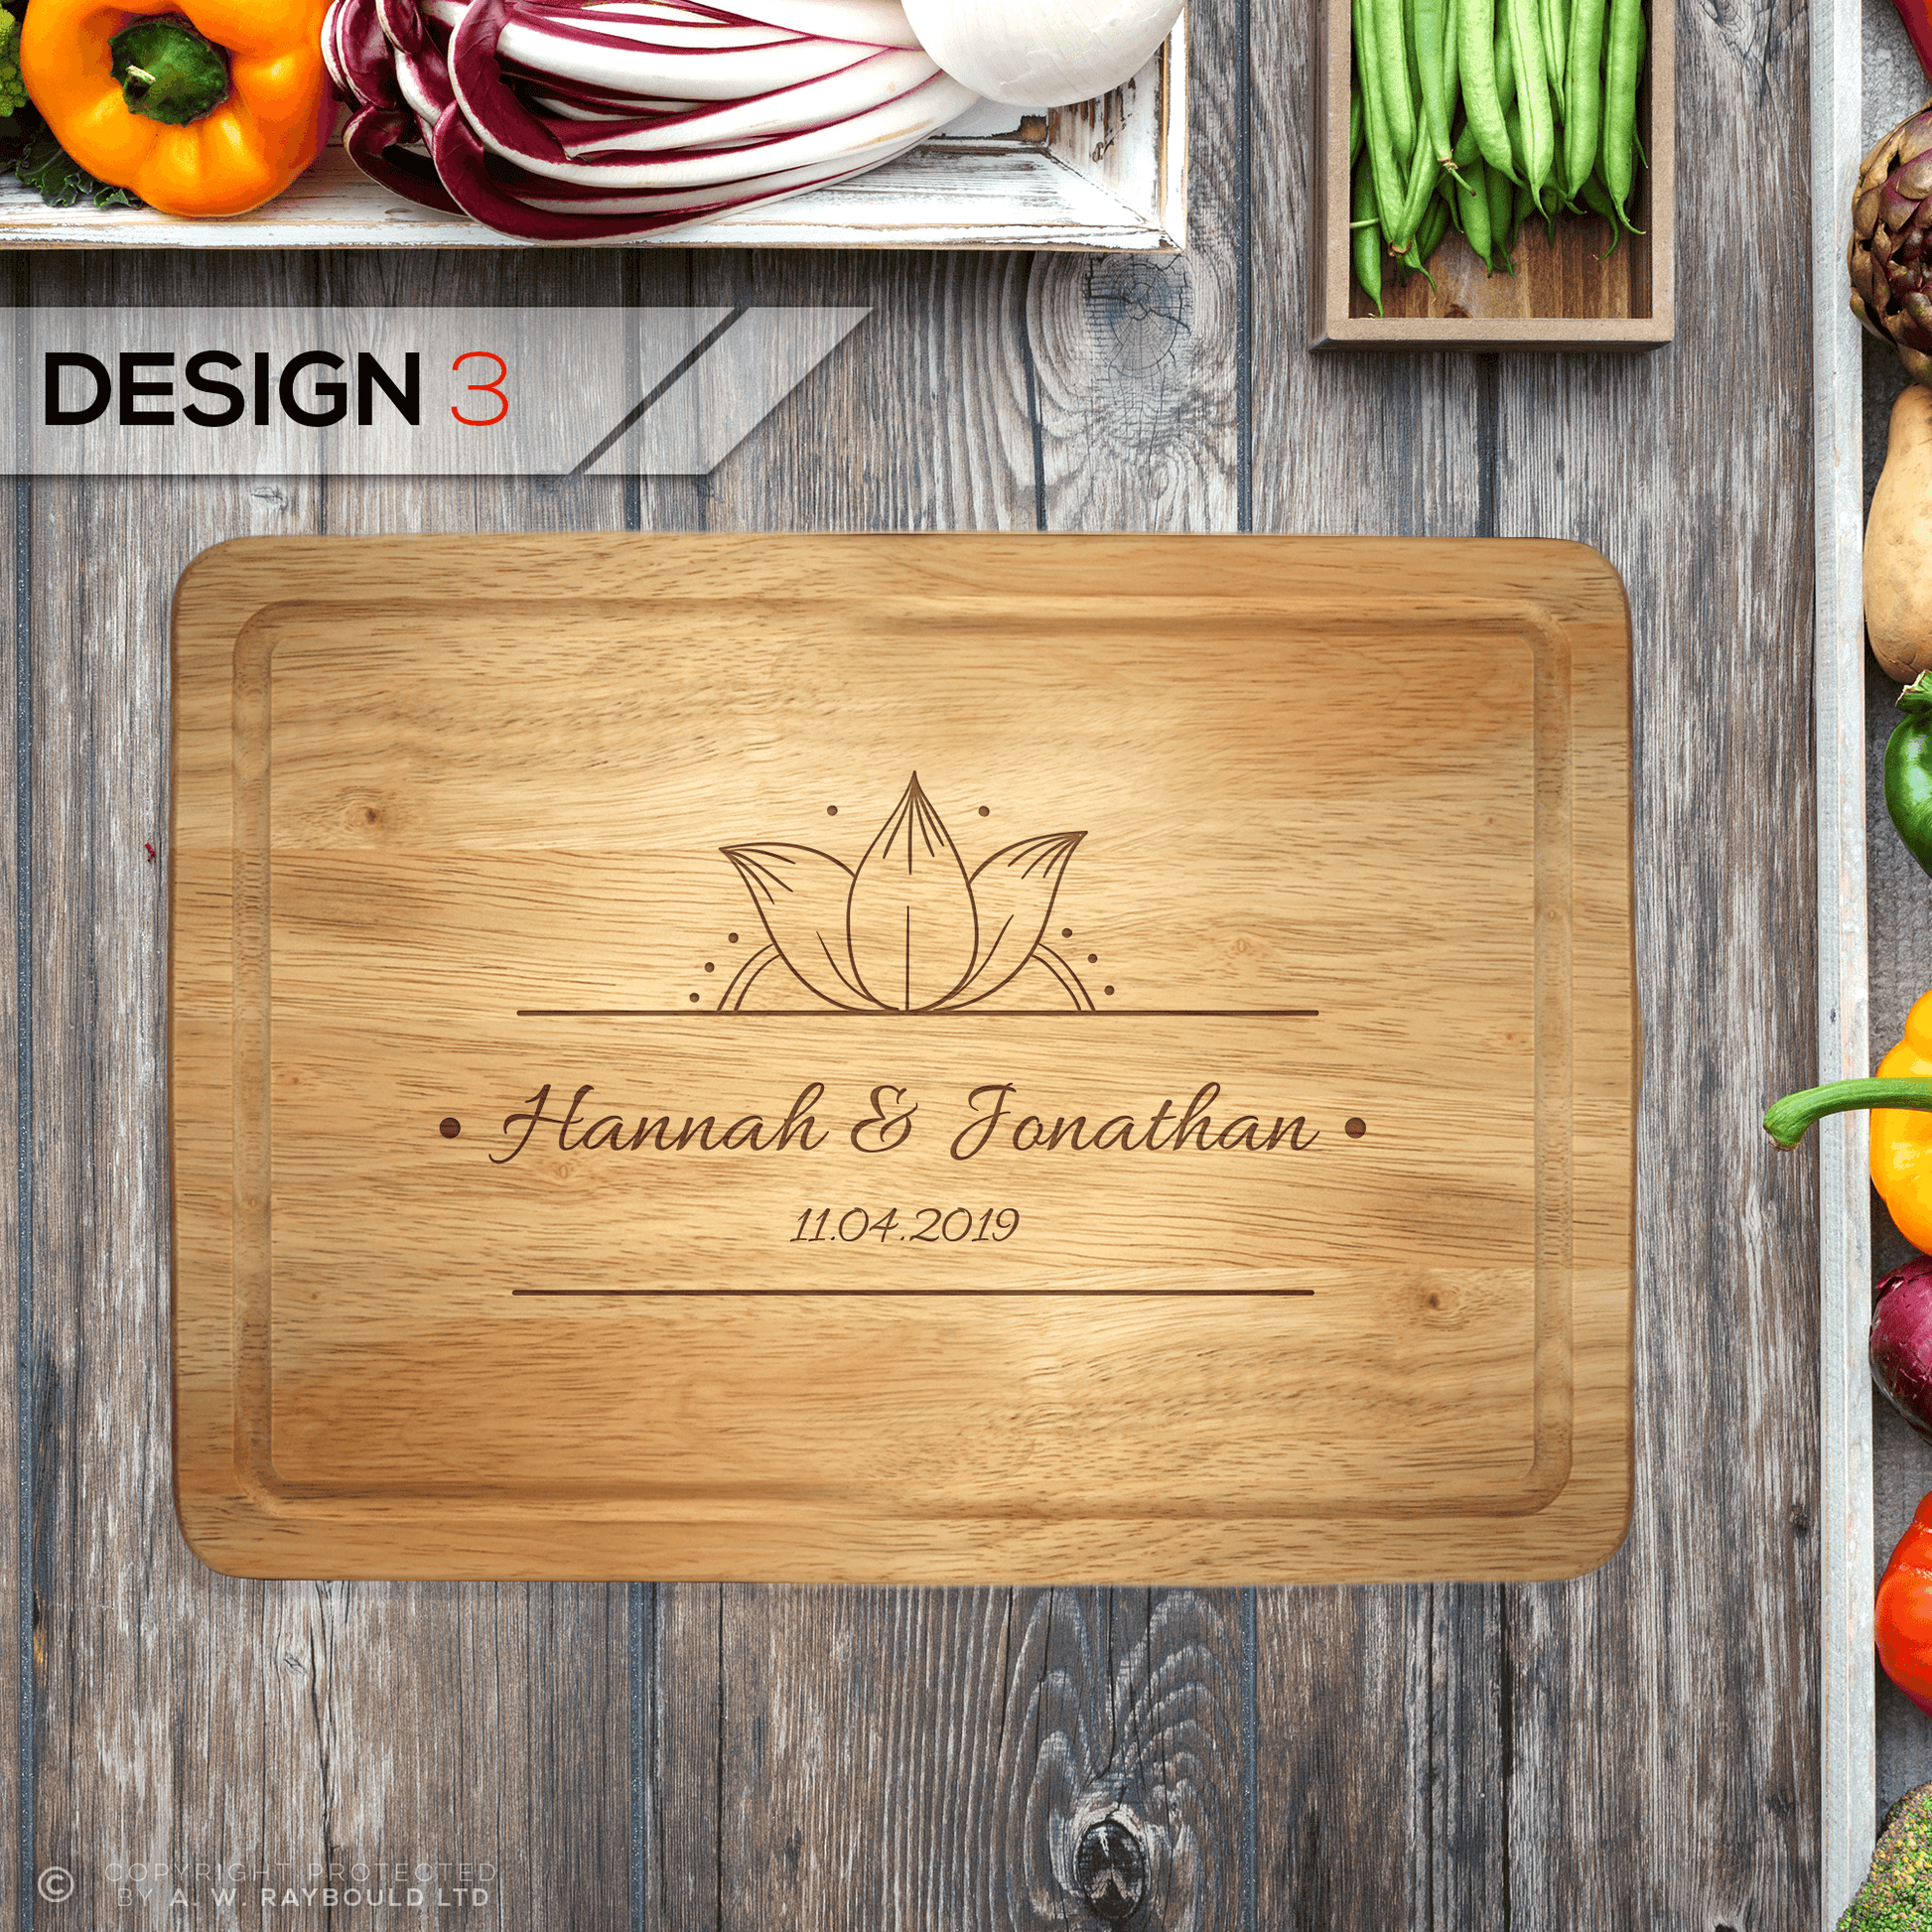 Personalised Engraved Wedding Rectangle Chopping Board - So Bespoke Gifts